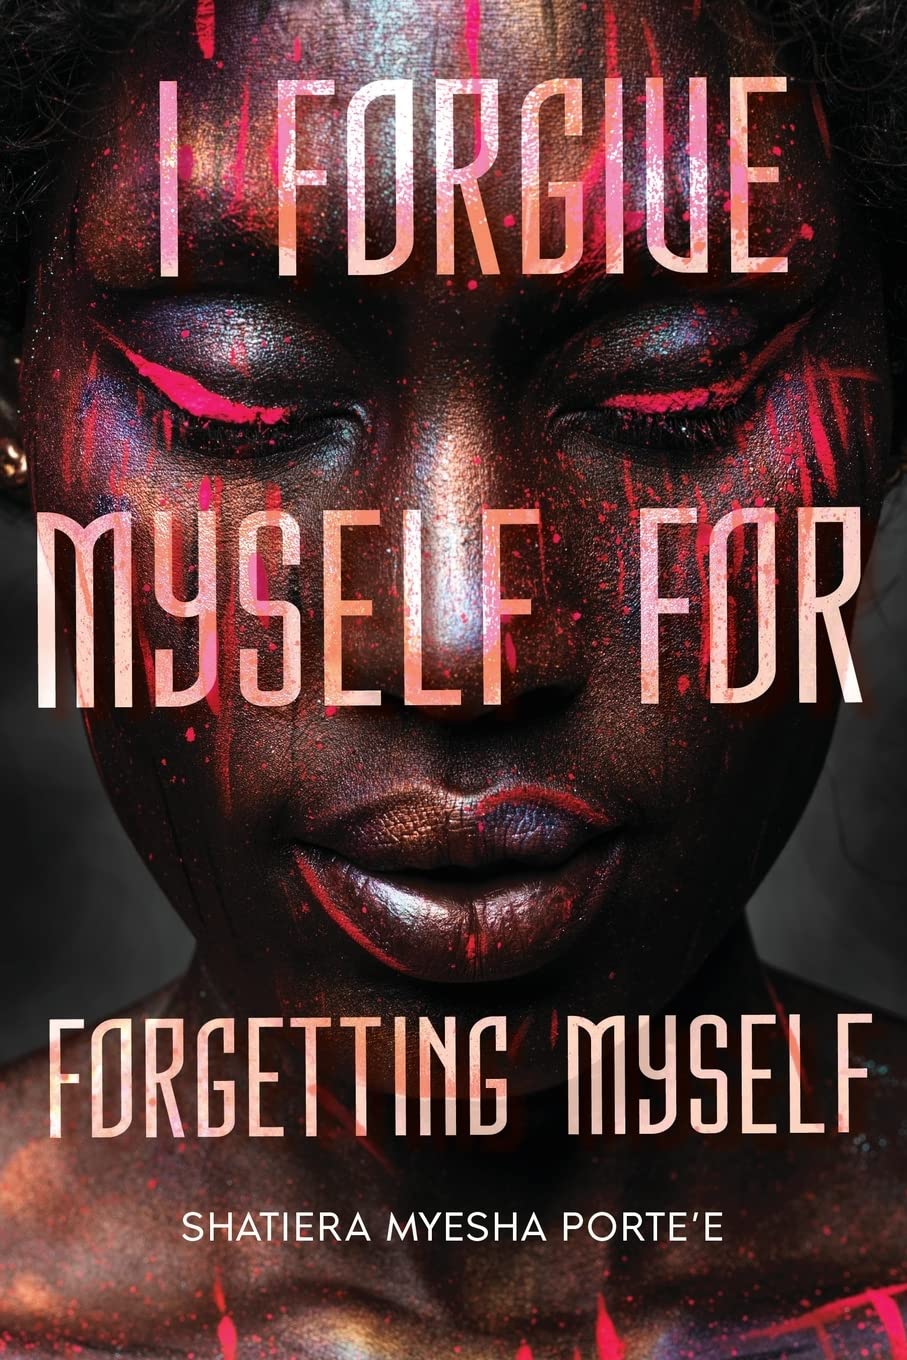 I Forgive Myself for Forgetting Myself -NJ Corrections Book Store